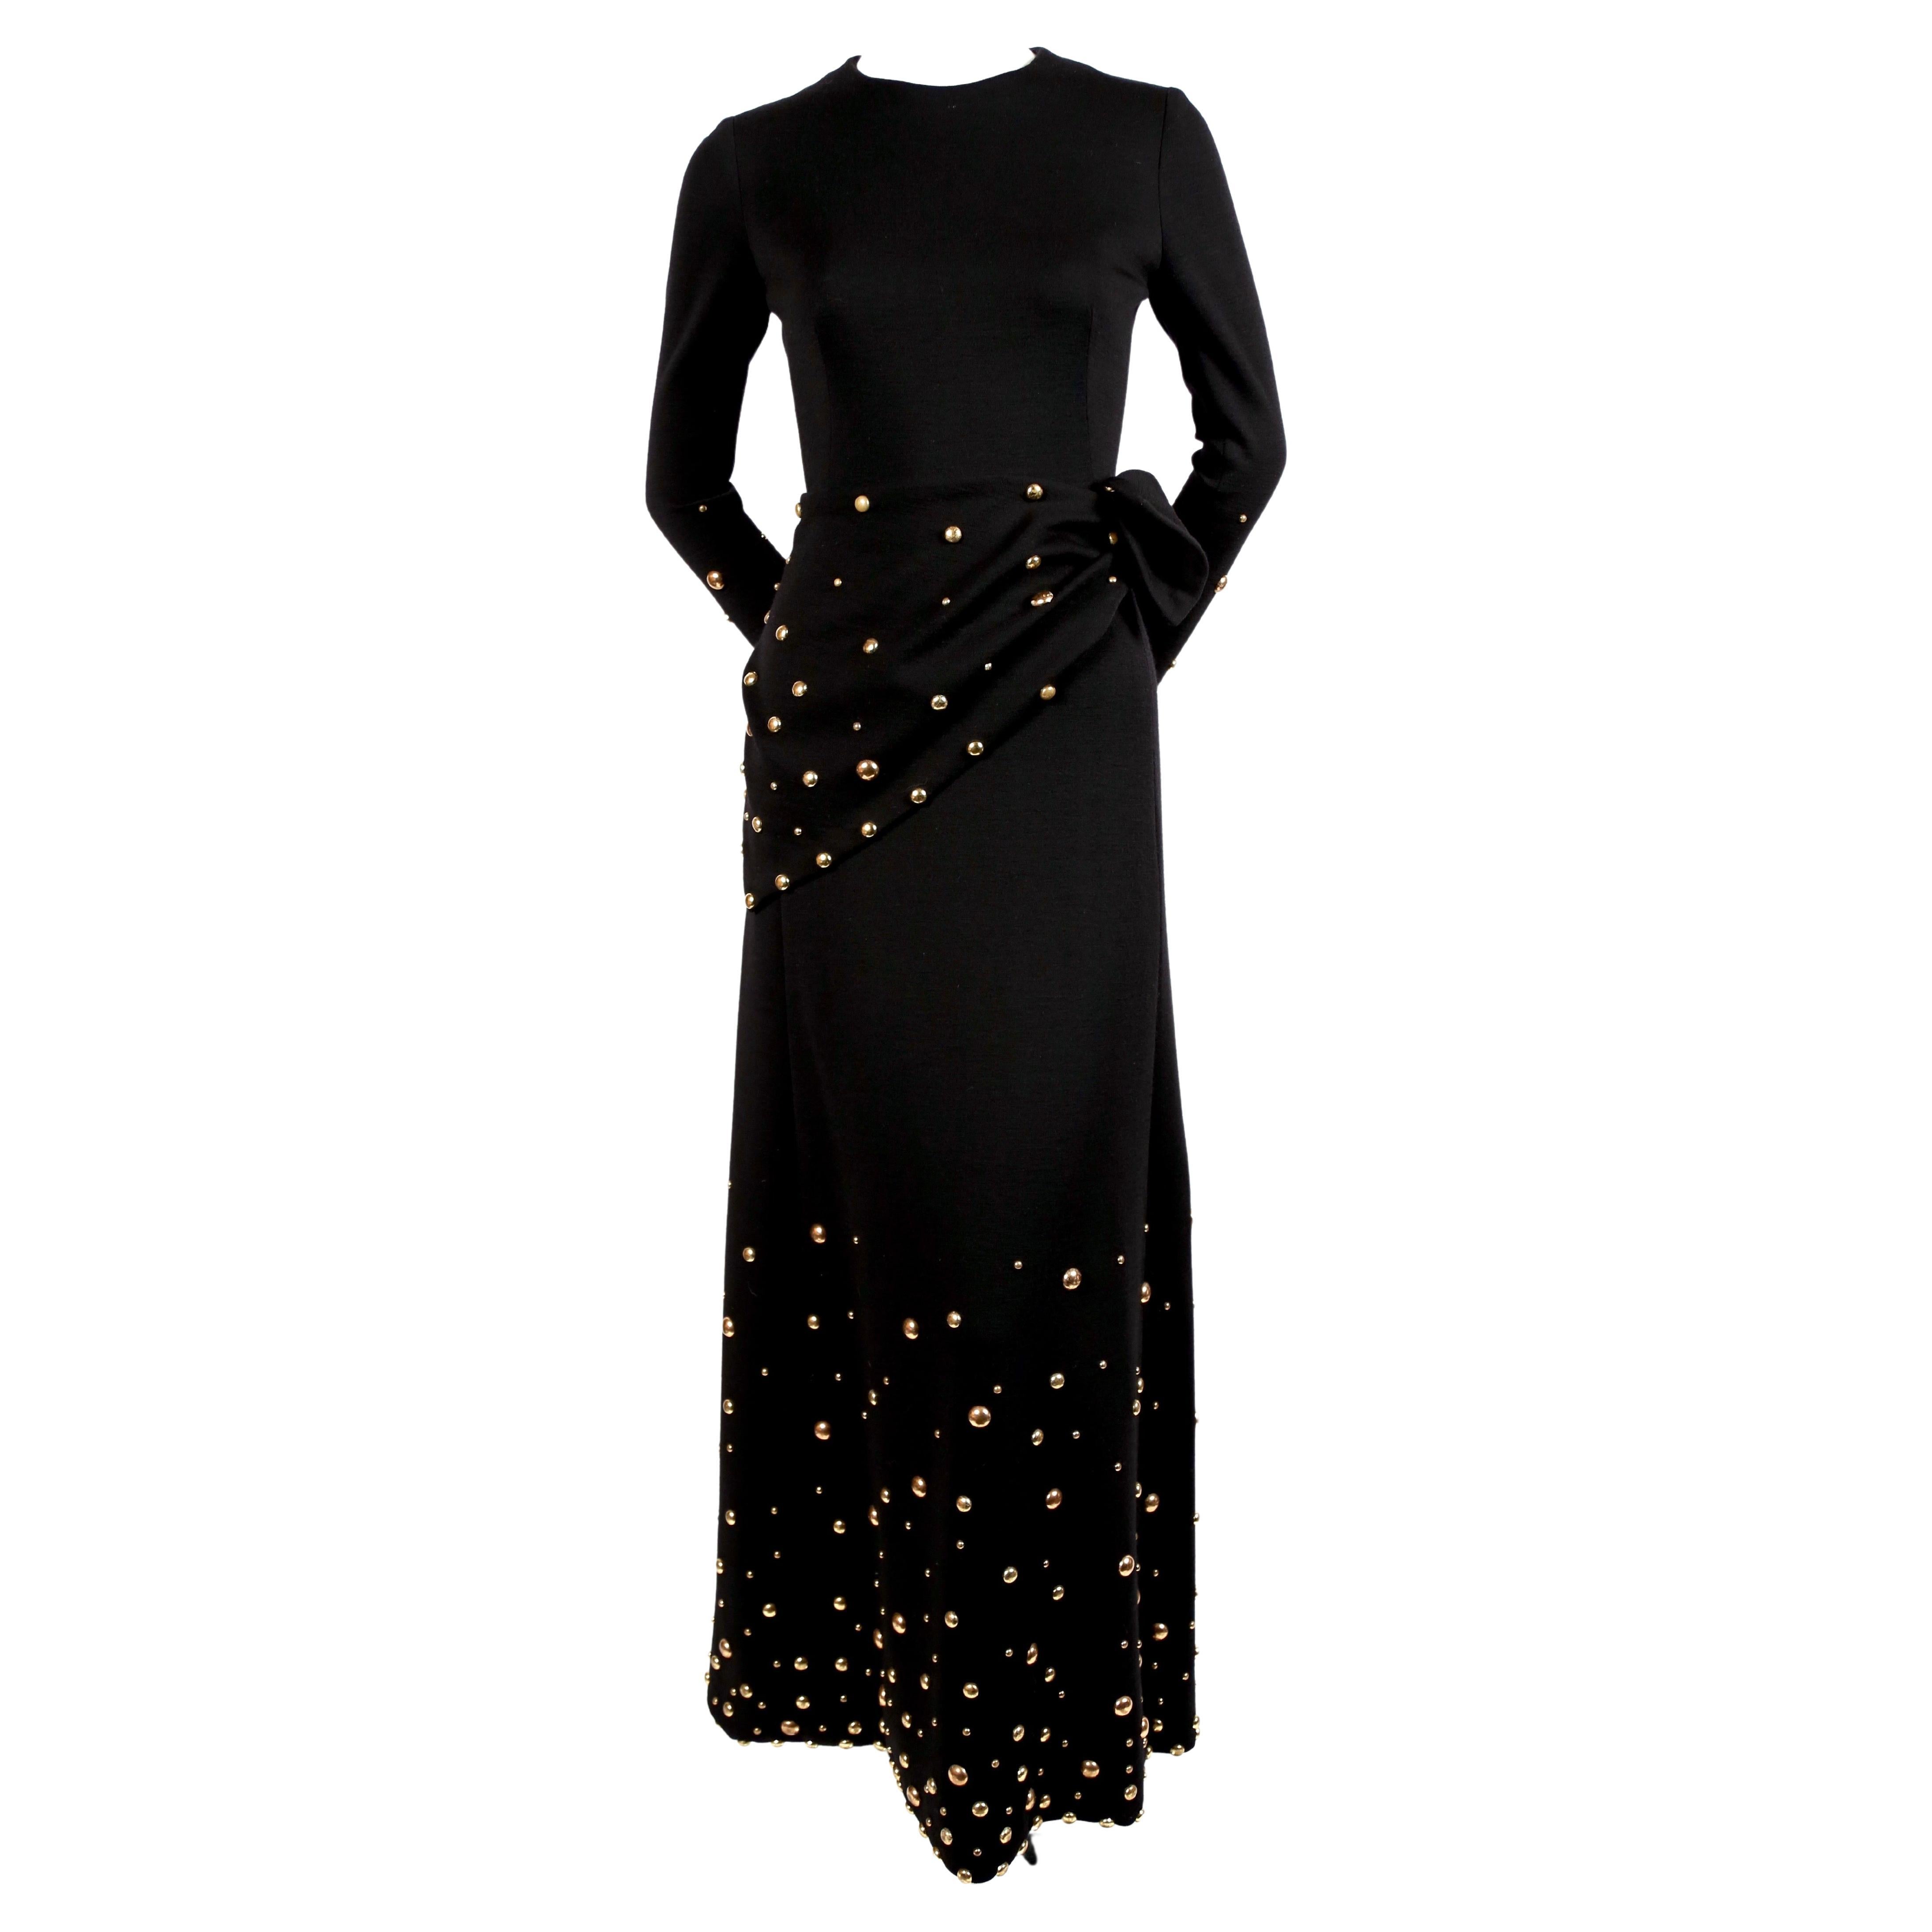 Exceptional, jet-black, wool jersey, maxi dress with gold toned studs and matching scarf designed by Givenchy dating to the 1970's. Dress fits a US 2 or 4. Measures approximately: 15